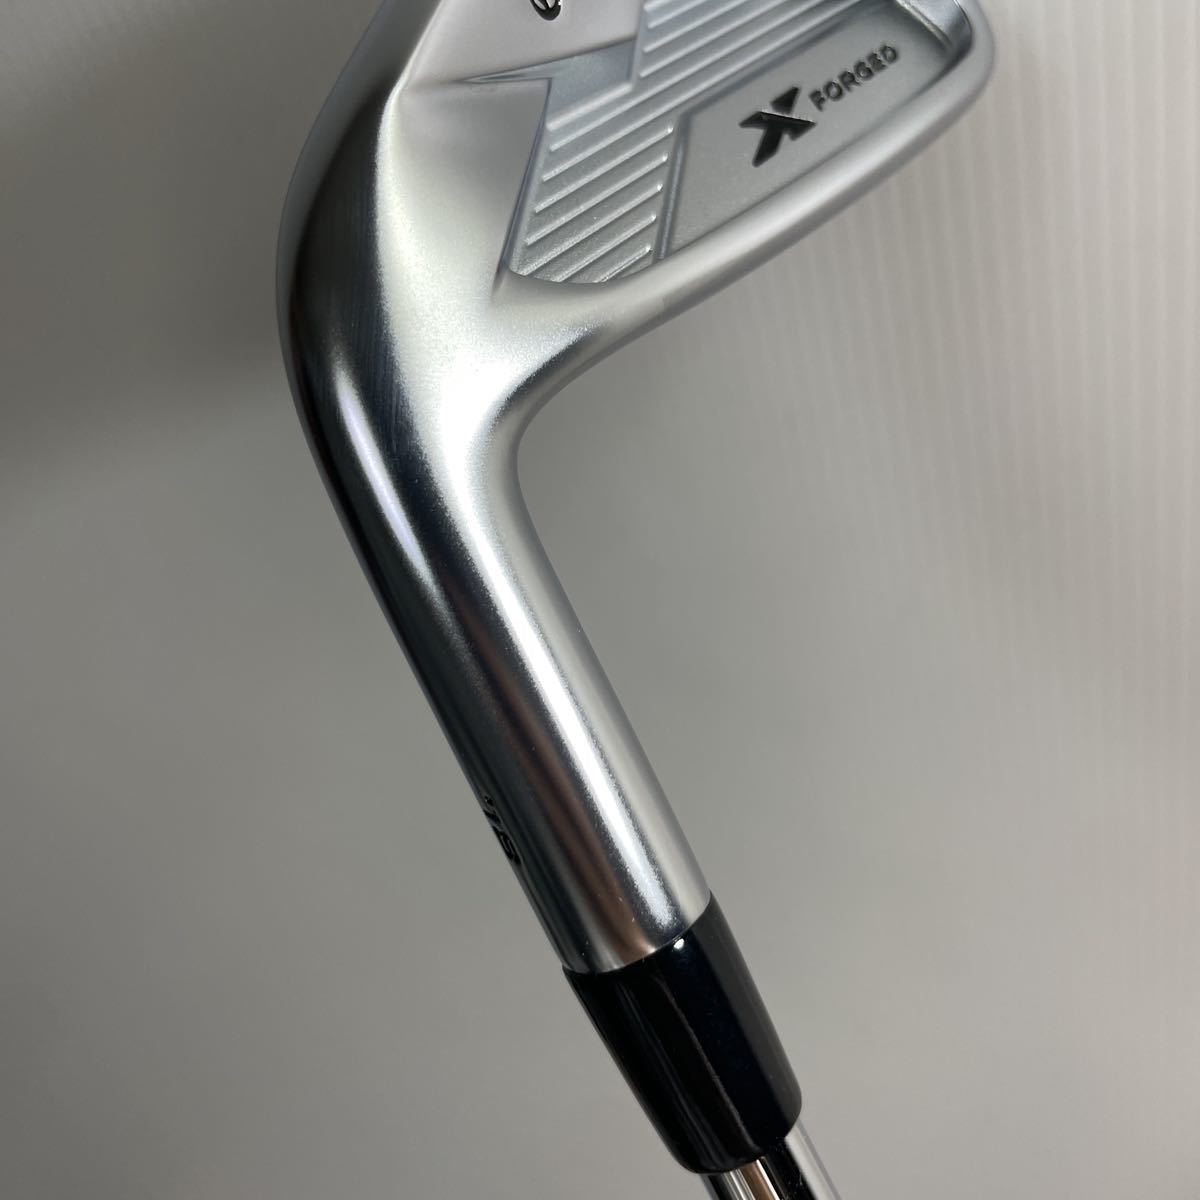  as good as new ref tea for single goods 4 number iron Callaway X FORGED US 2018 #4 PROJECT X 6.0 SX Flex Callaway Project X left for number 985